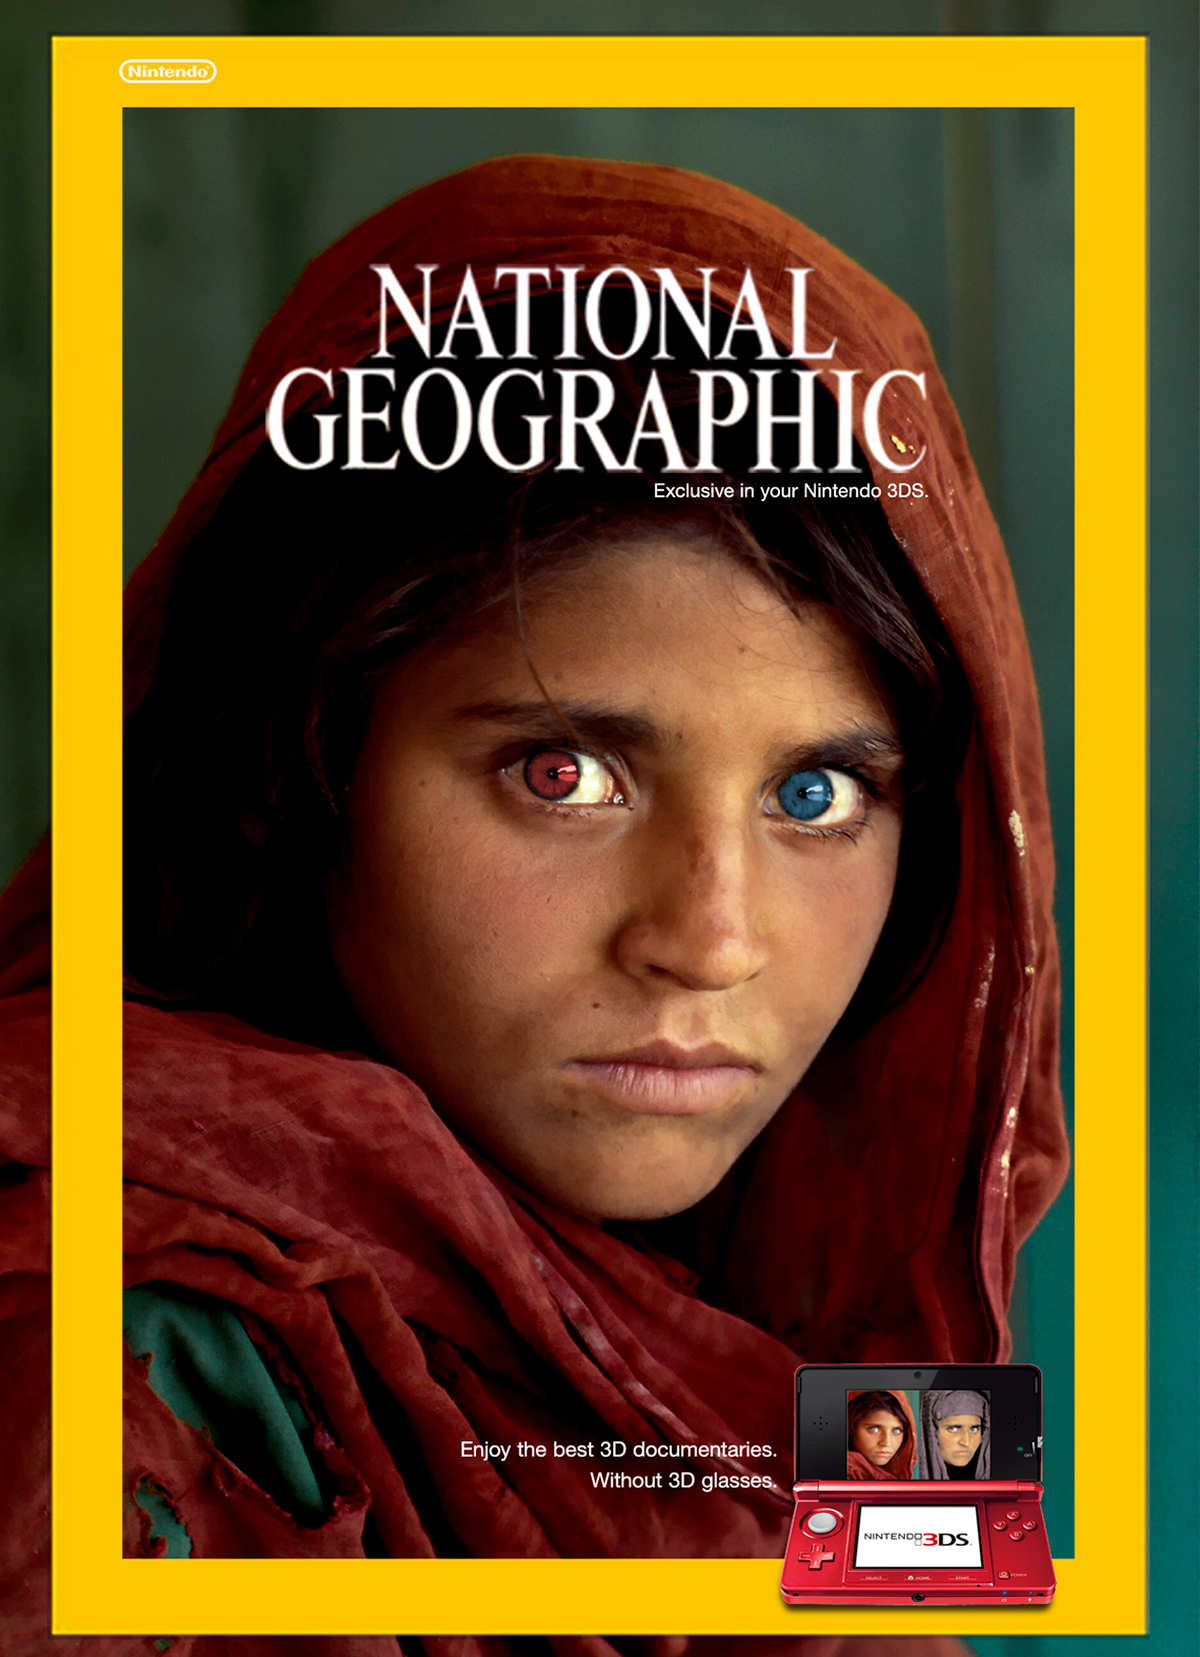 national geographic Nintendo 3ds